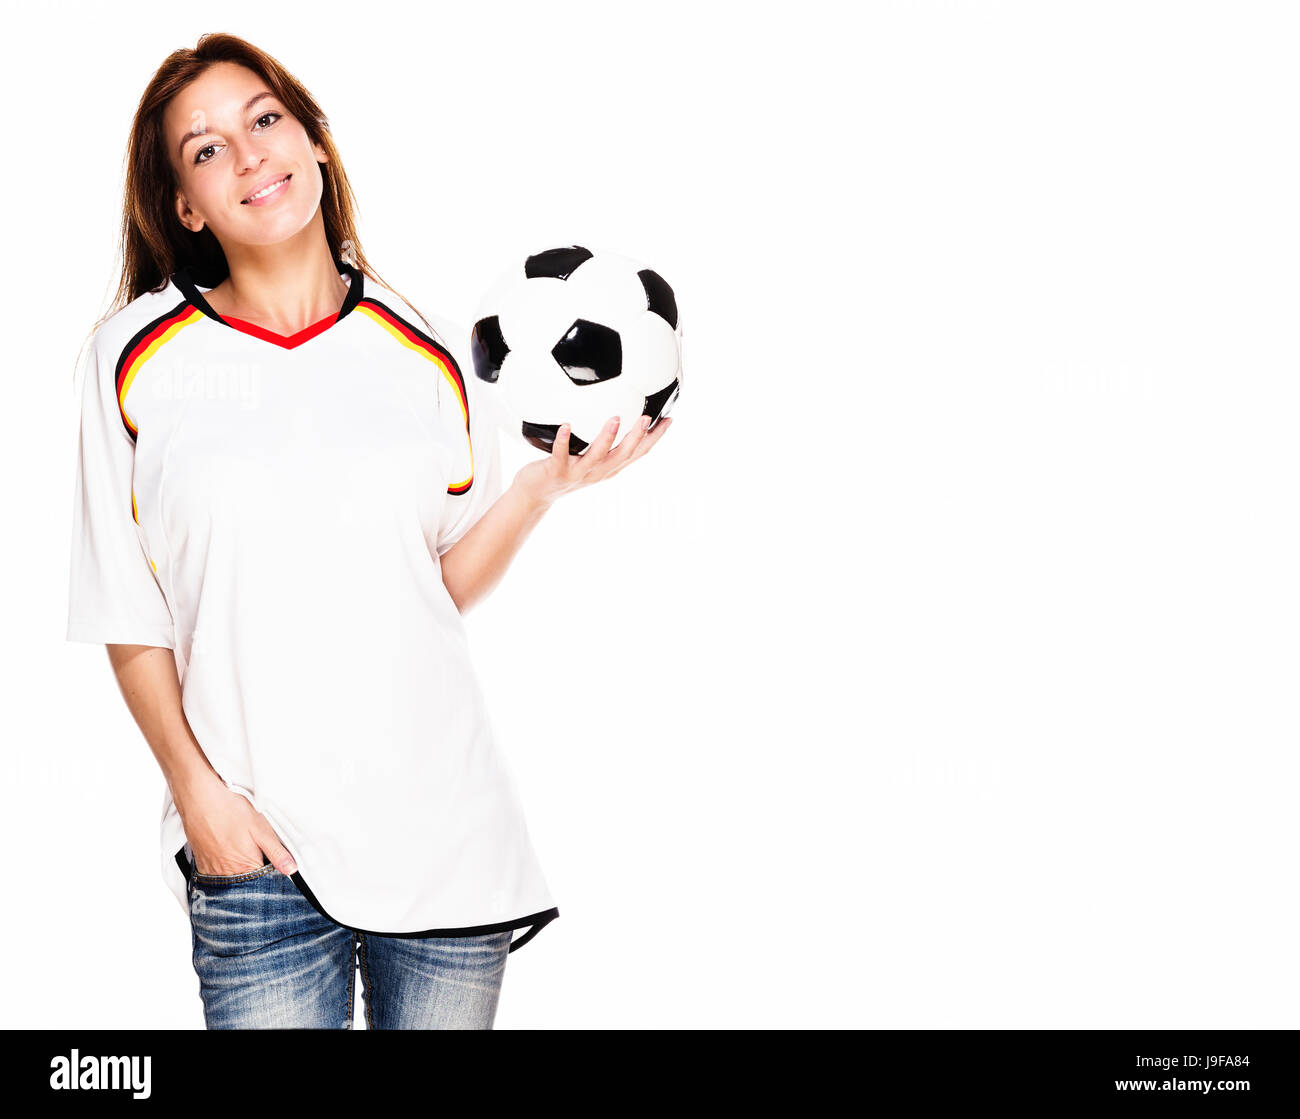 young laughing woman wearing jersey and holding football Stock Photo